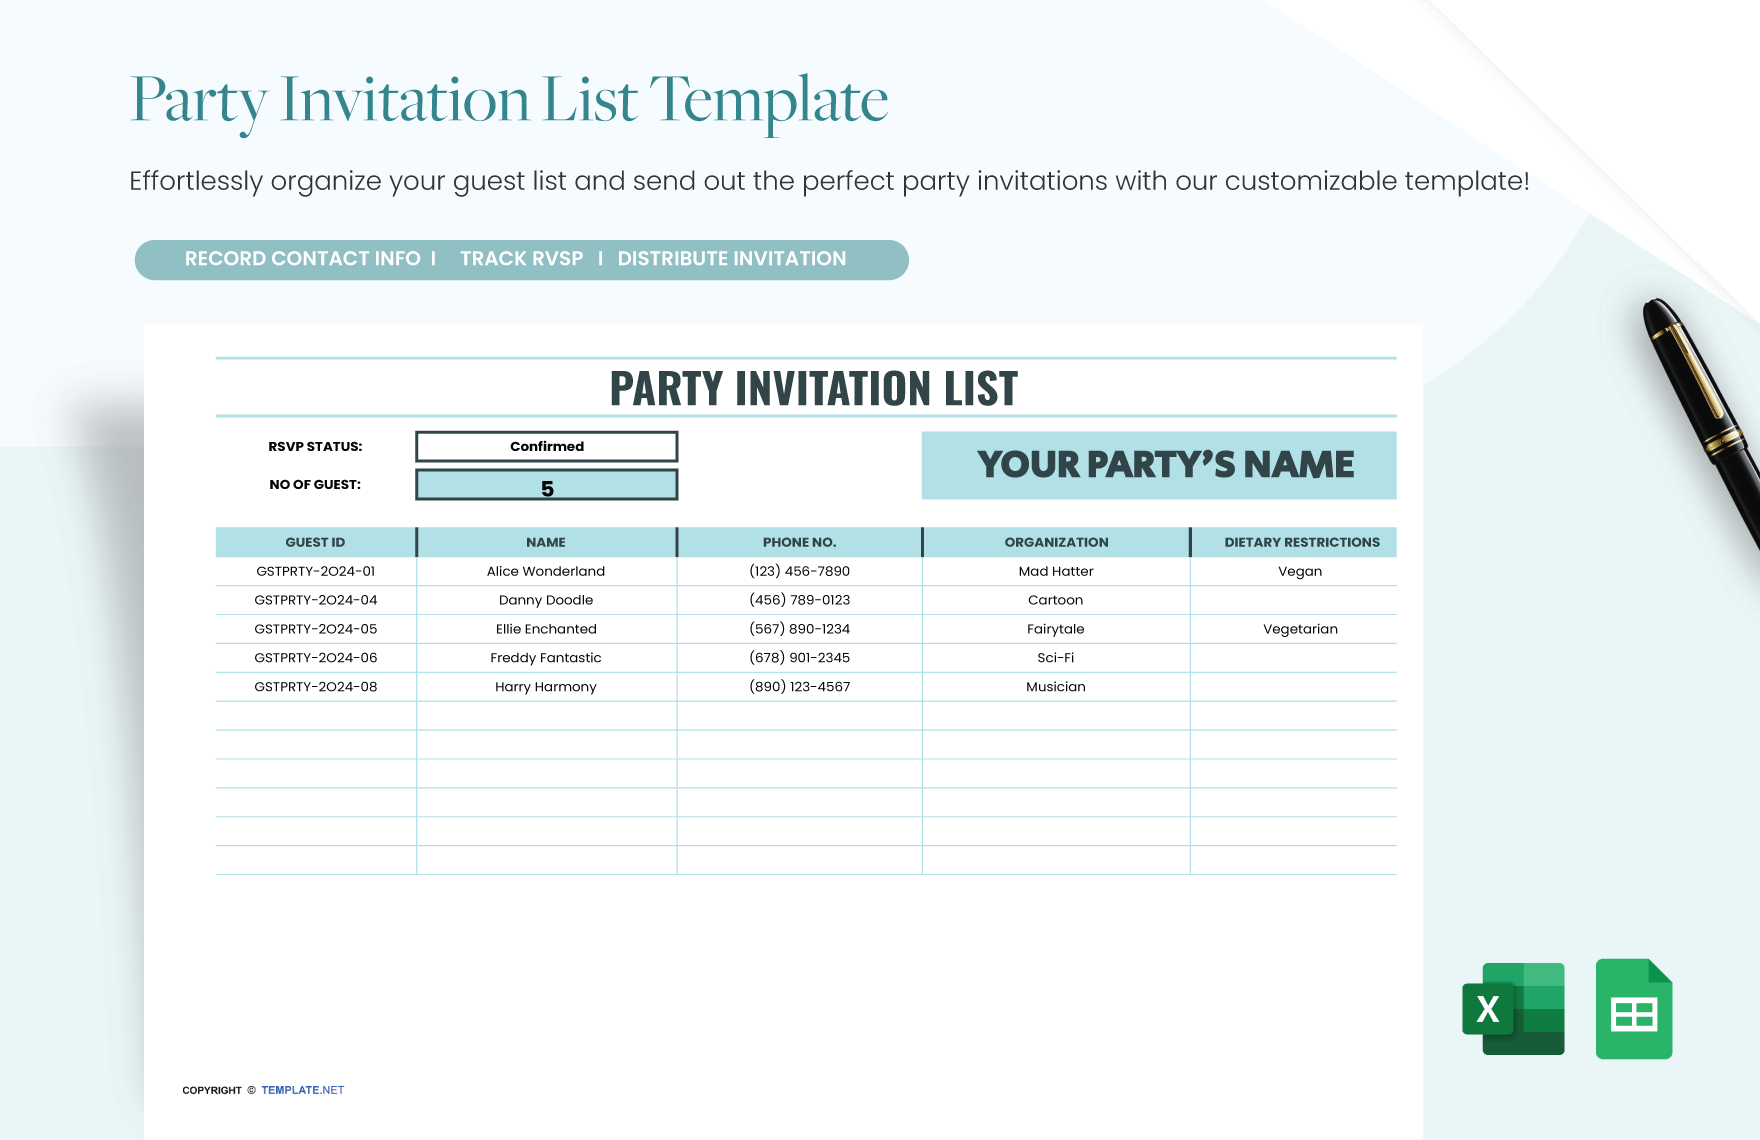 Party Invitation List Template in Excel, Google Sheets